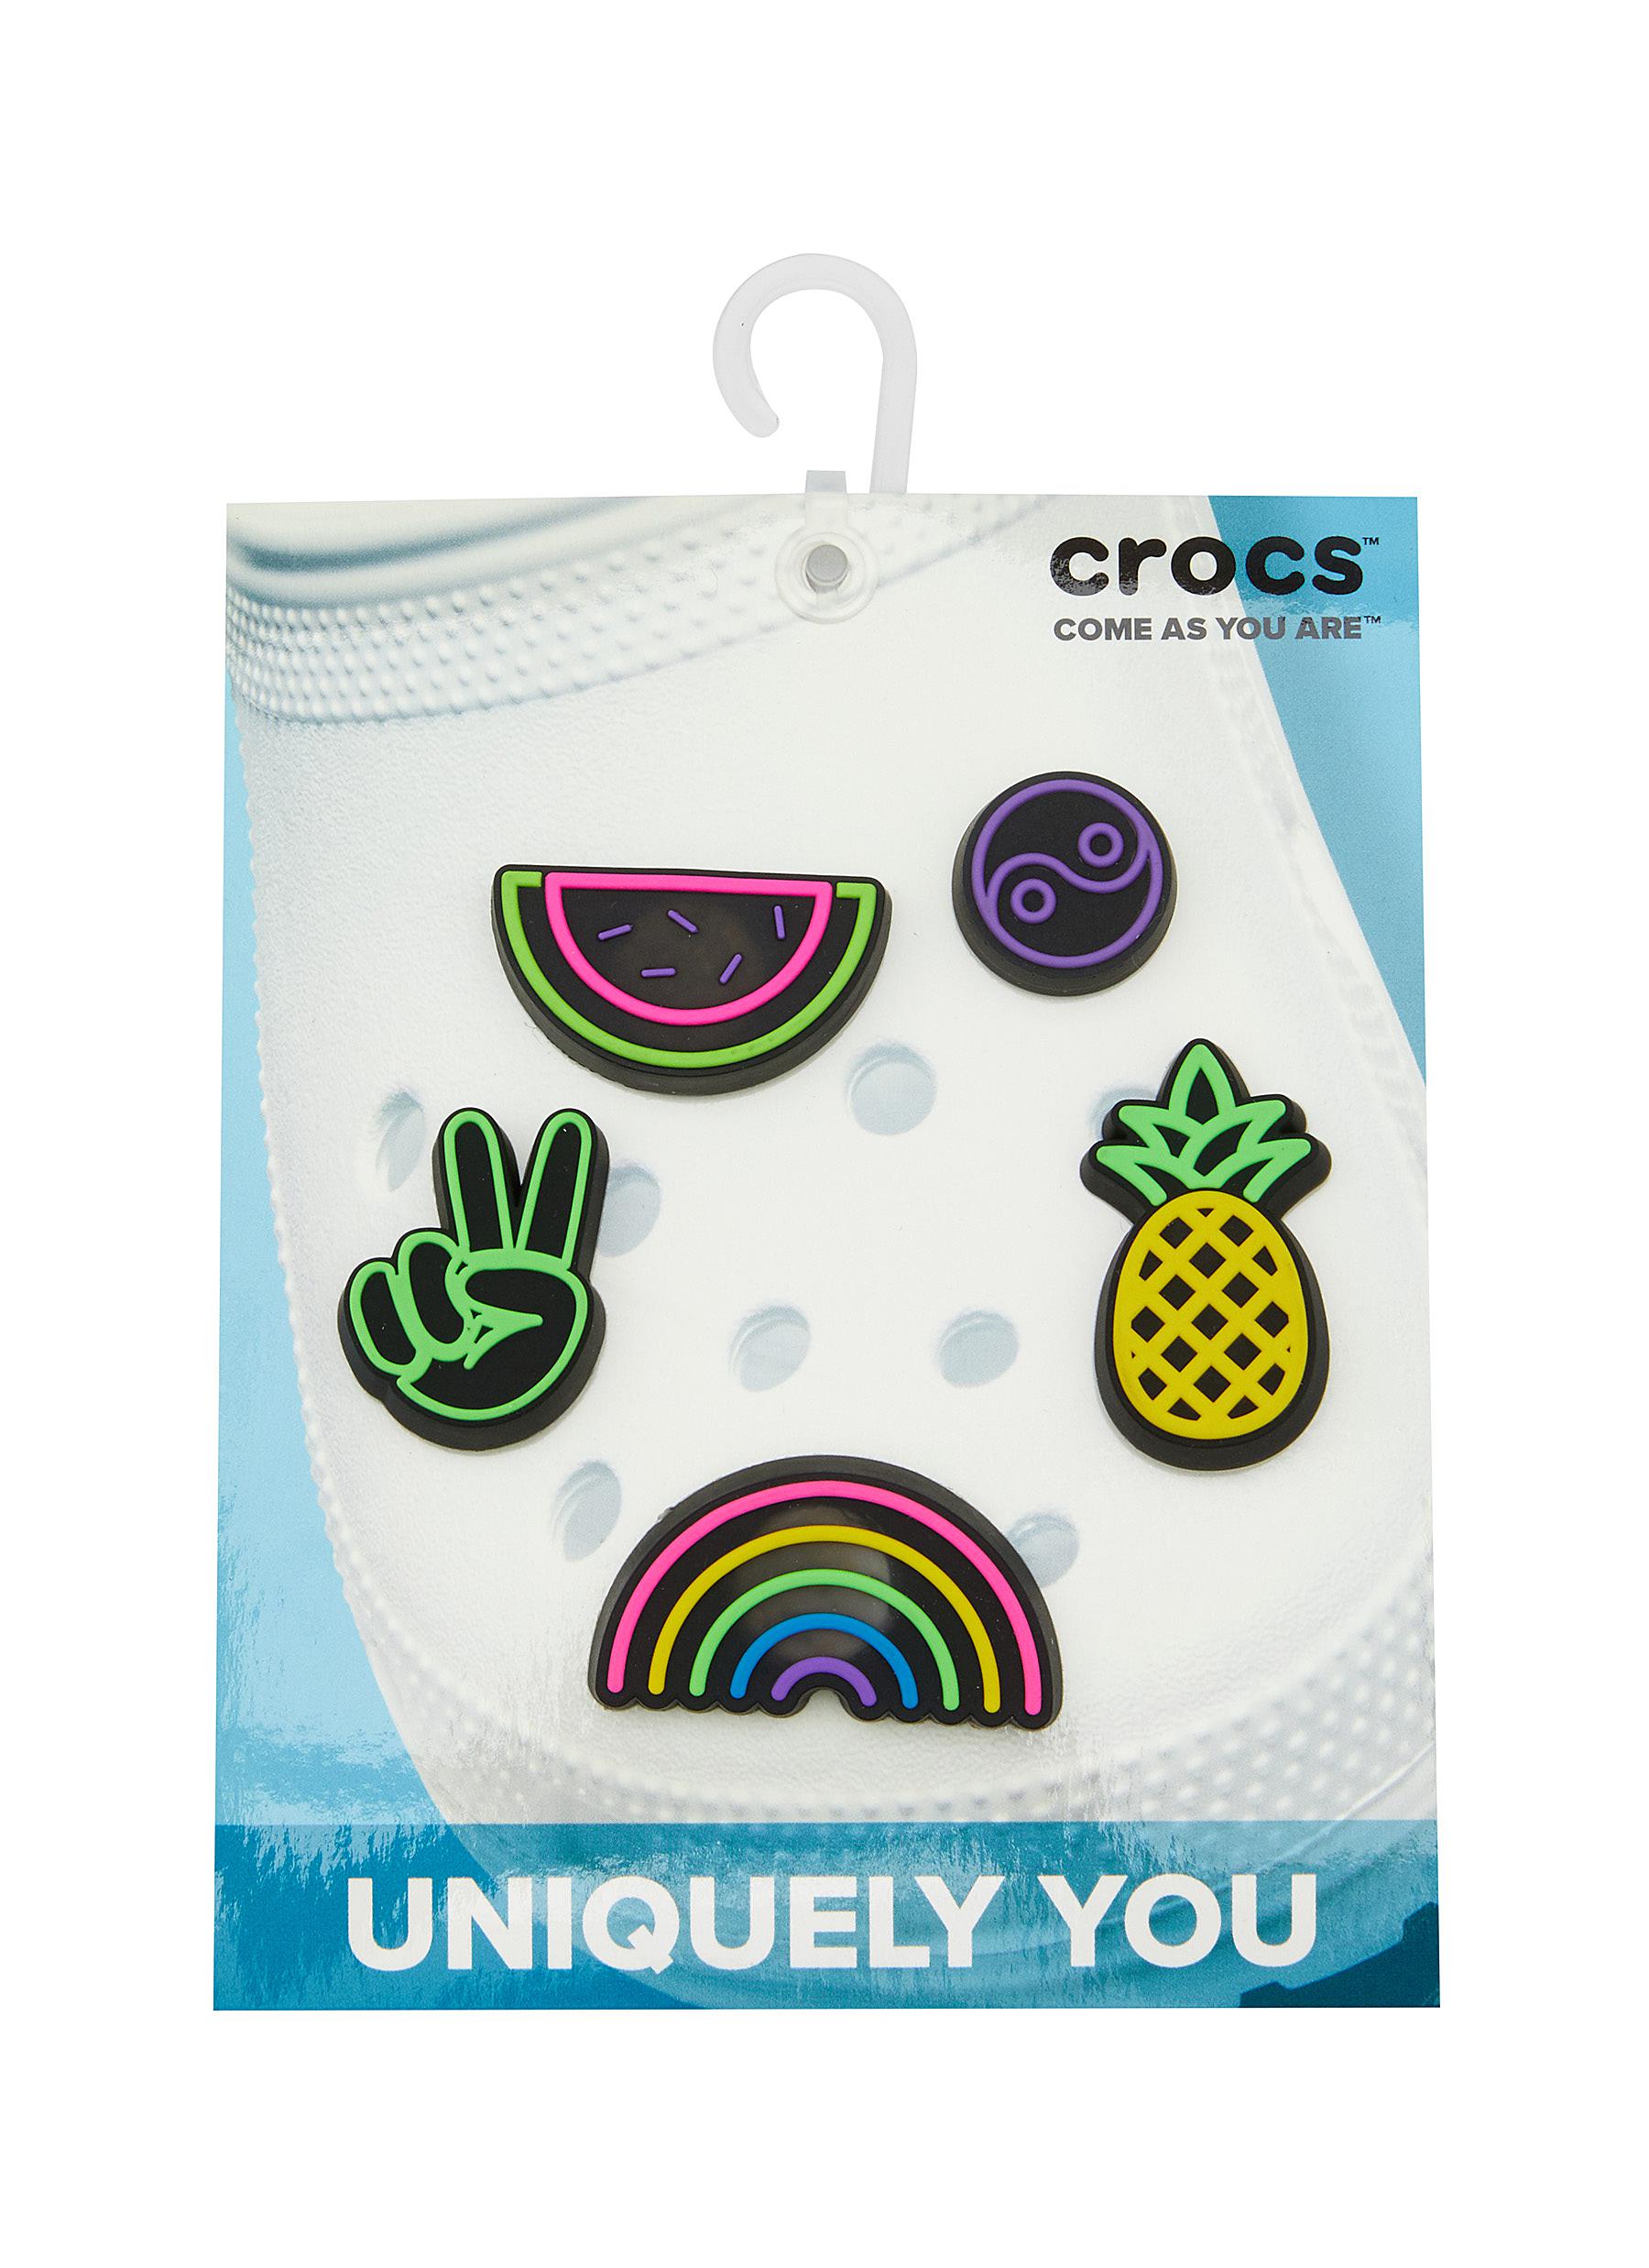 🔥 Level up your Crocs game with the $1 Fortnight Croc Charm